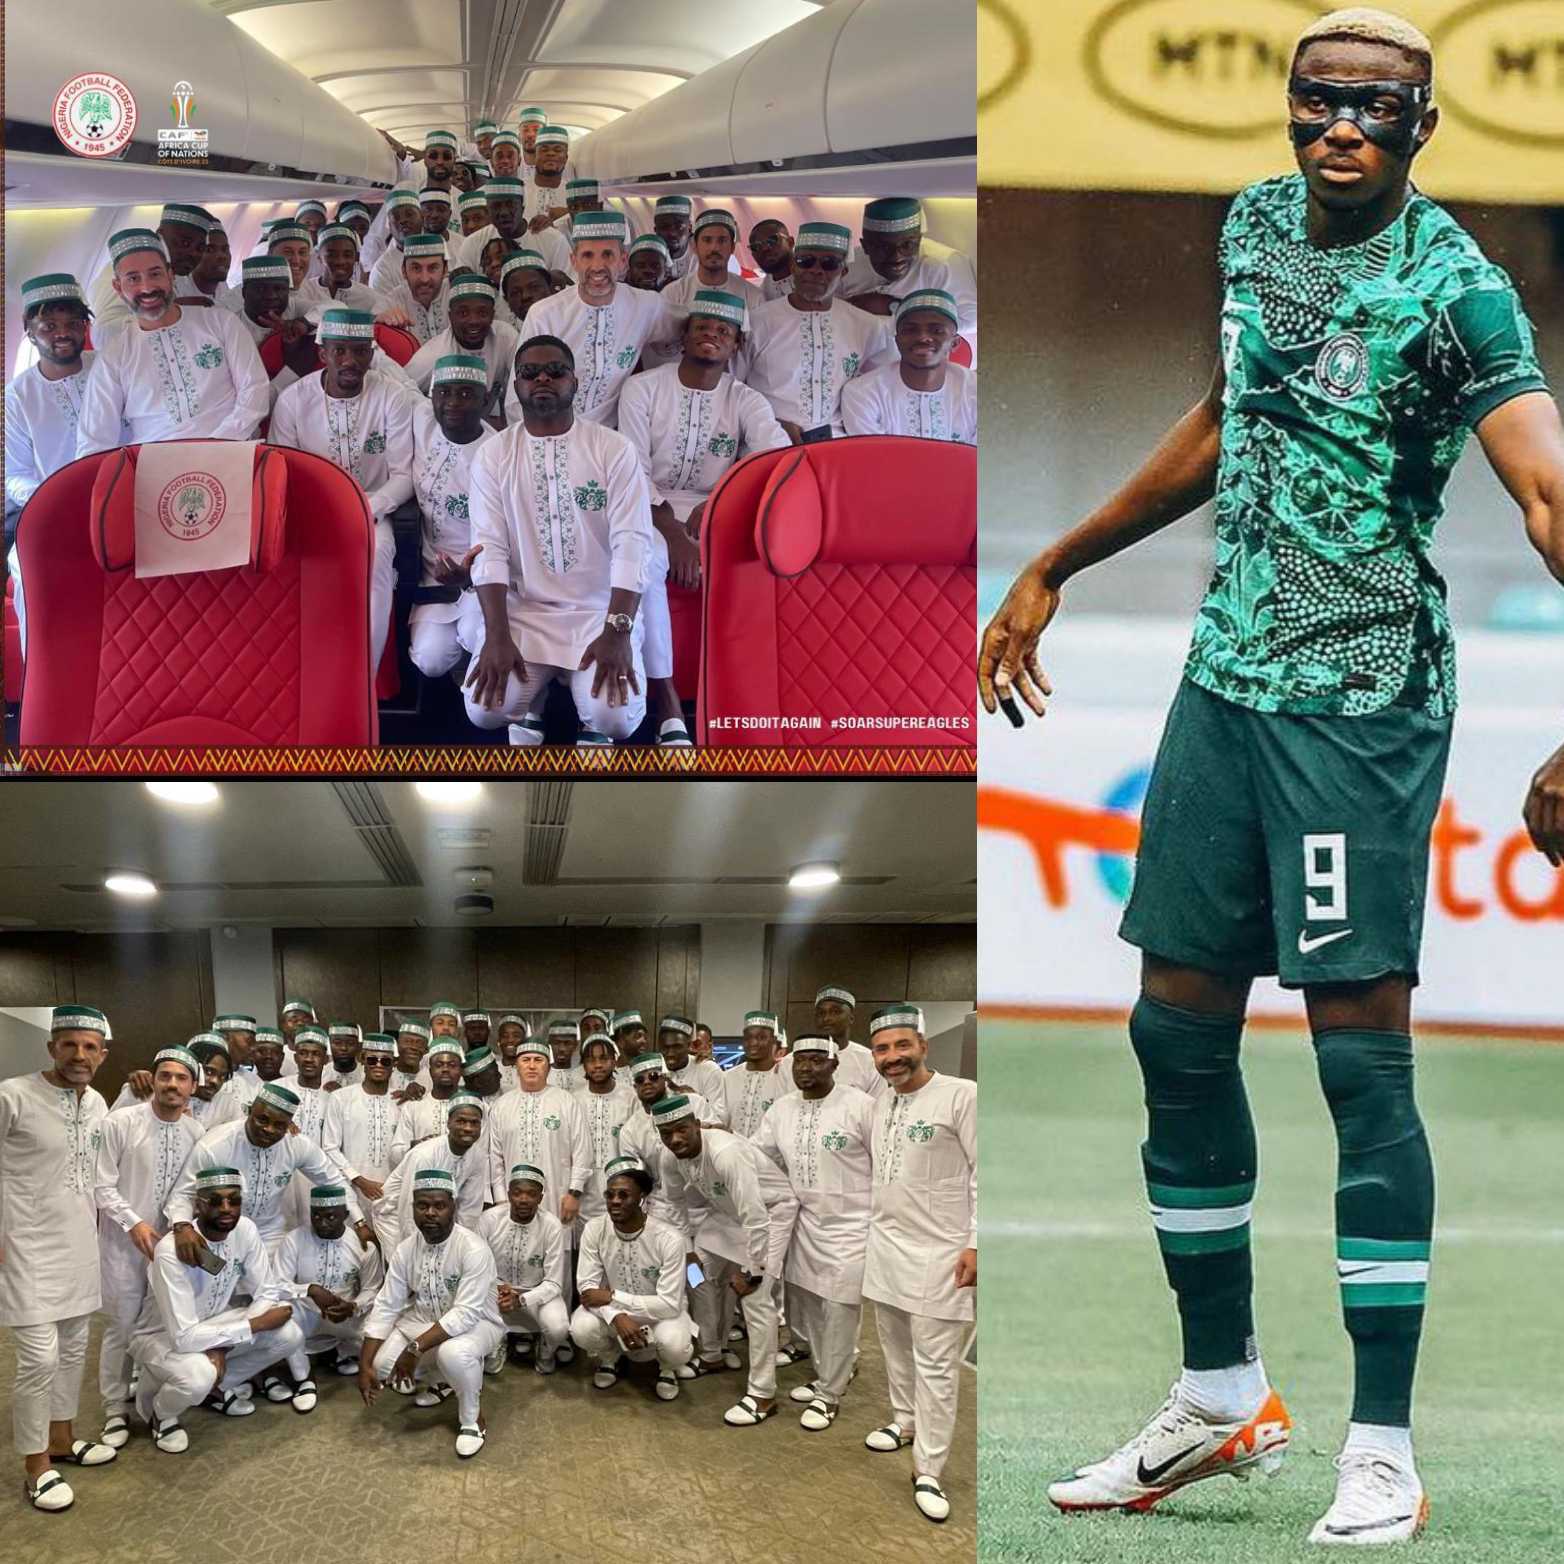 Osimhen Tops As Super Eagles Lead In AFCON 2023 Squad Values At €349m; But Nigeria Not Top Title Favourites